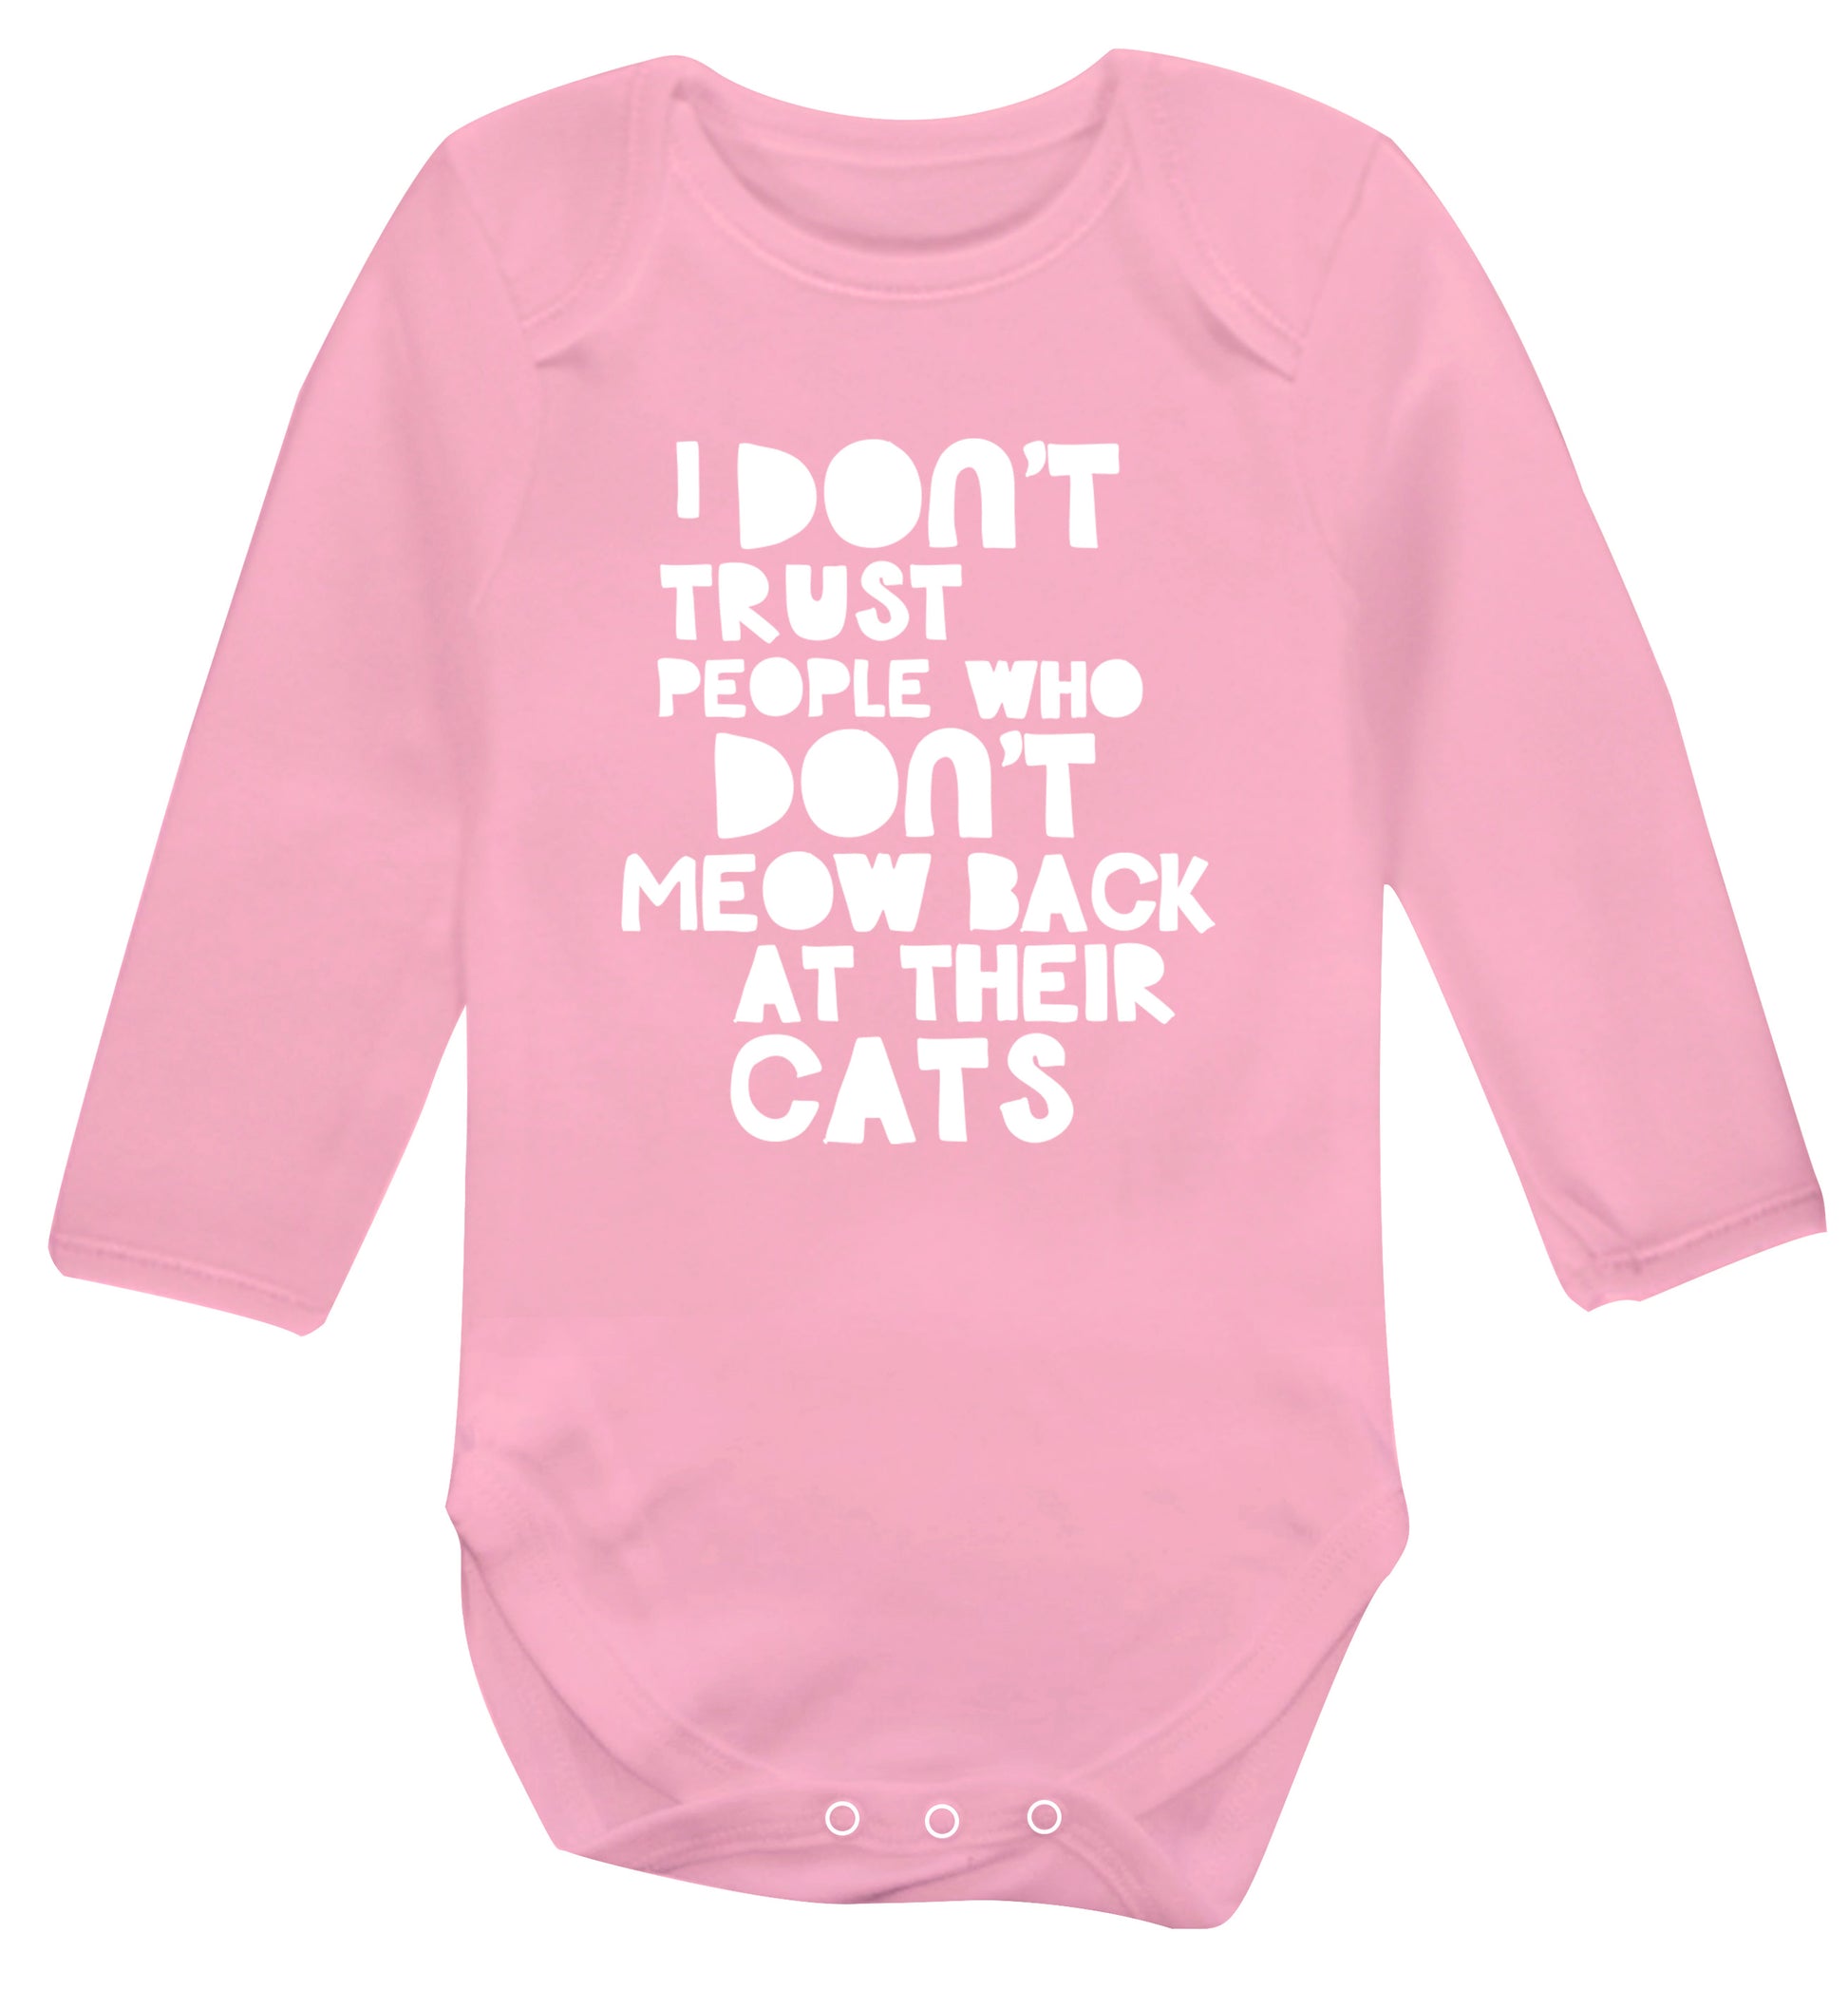 I don't trust people who don't meow back at their cats Baby Vest long sleeved pale pink 6-12 months